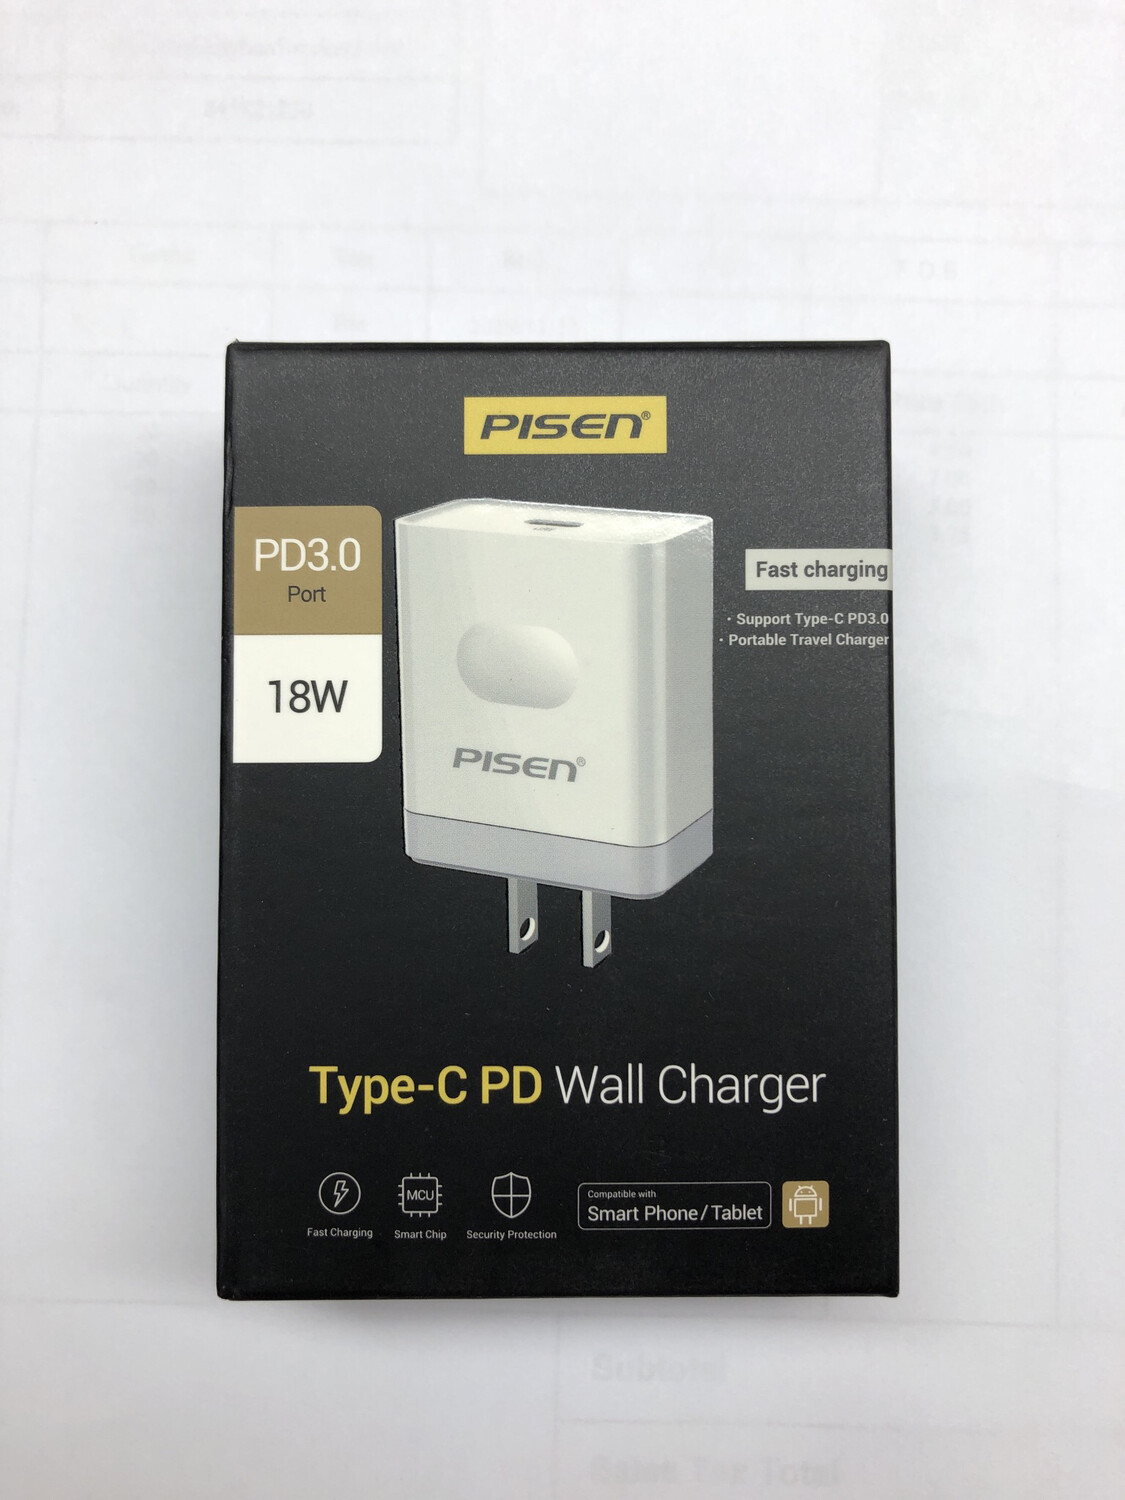 Pisen PD 3.0 Type-C PD Wall Charger 